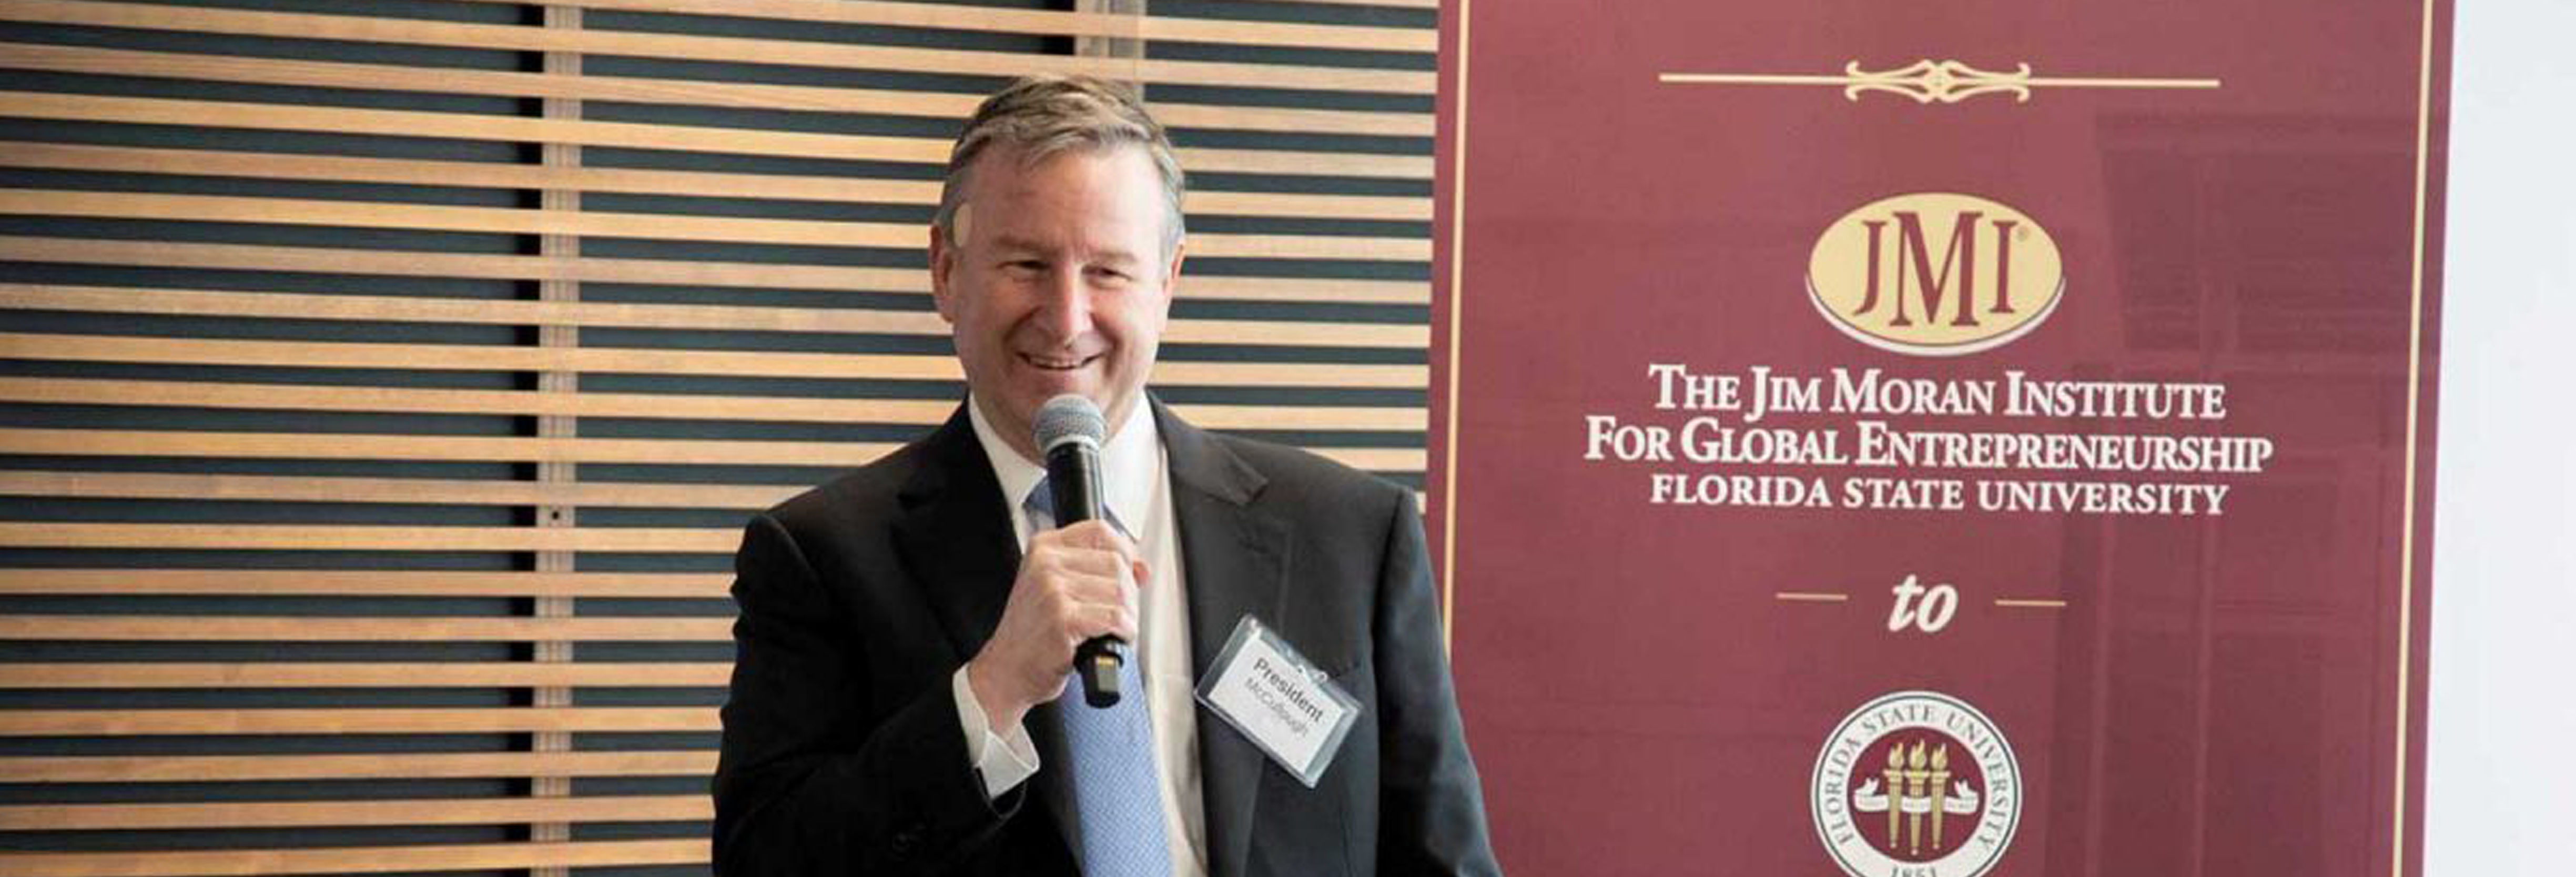 Florida State University President Richard McCullough said the Jim Moran Institute's transition, "unites the institute and the college in a way that naturally enhances collaboration."